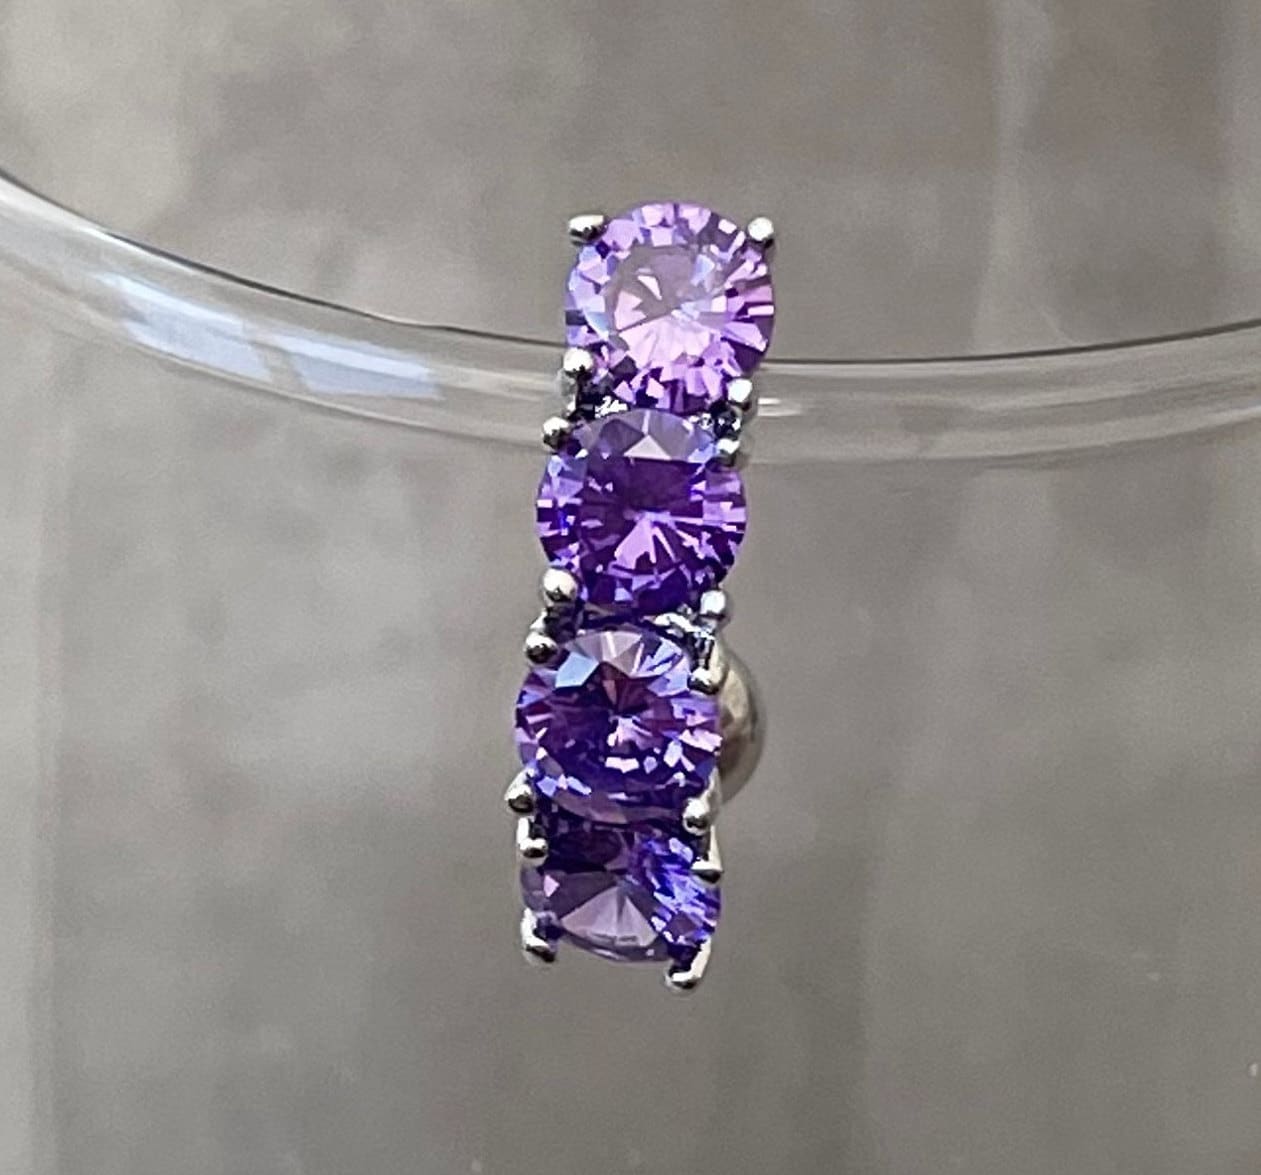 Silver Purple Top Down Belly Button Ring (14G | 10mm | Surgical Steel)